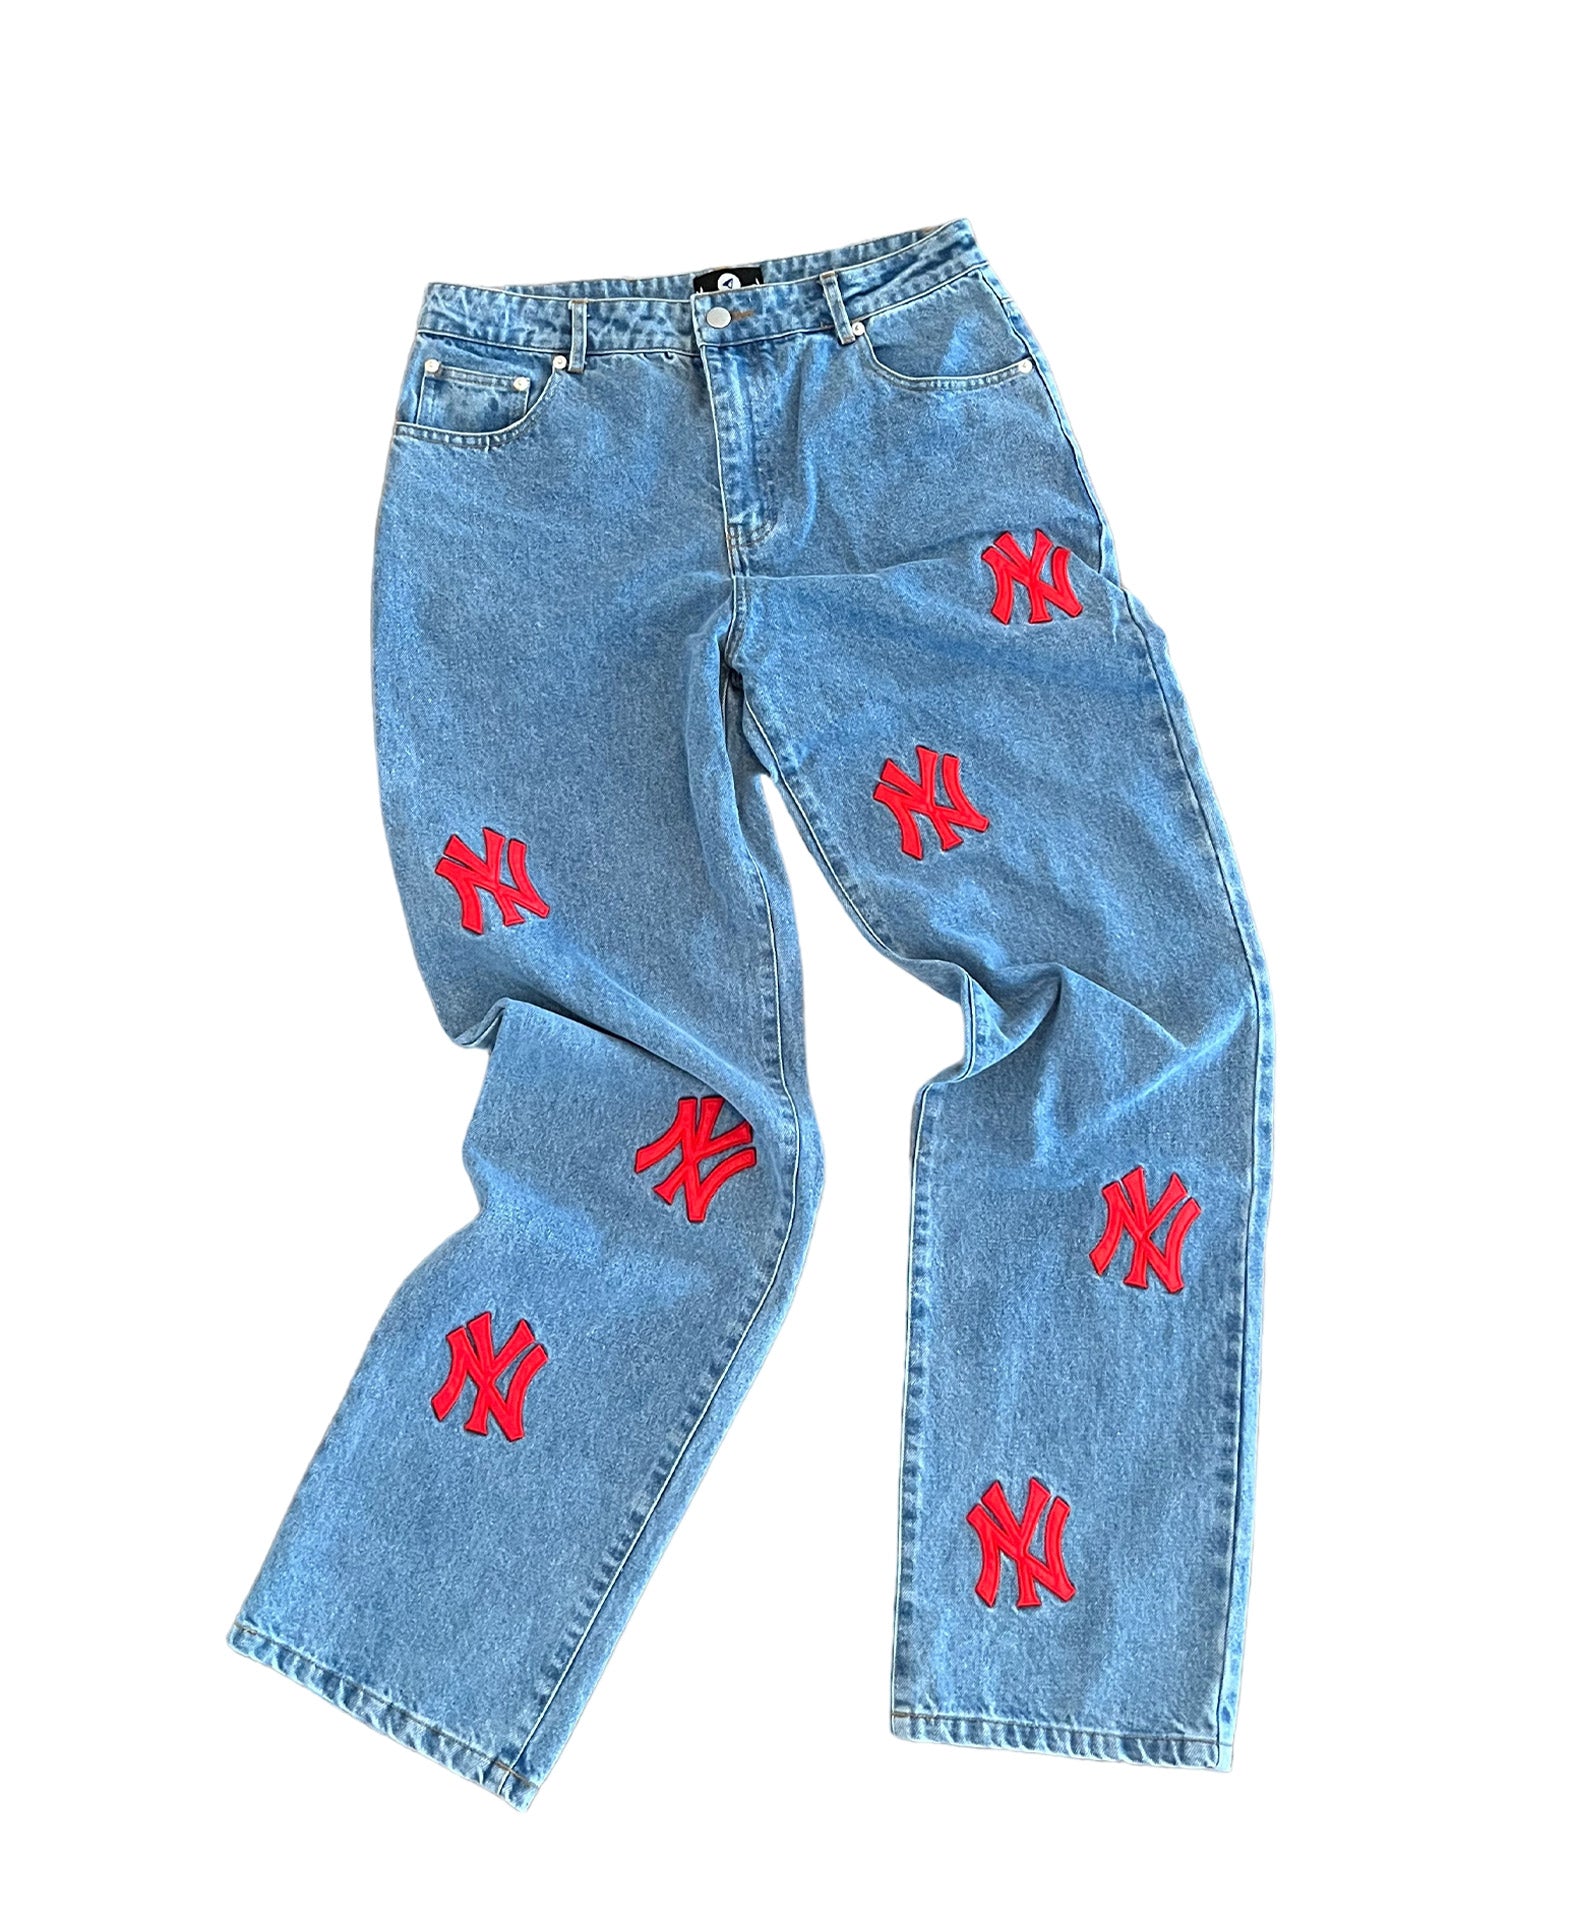 New York Patch Jeans - Blue wash